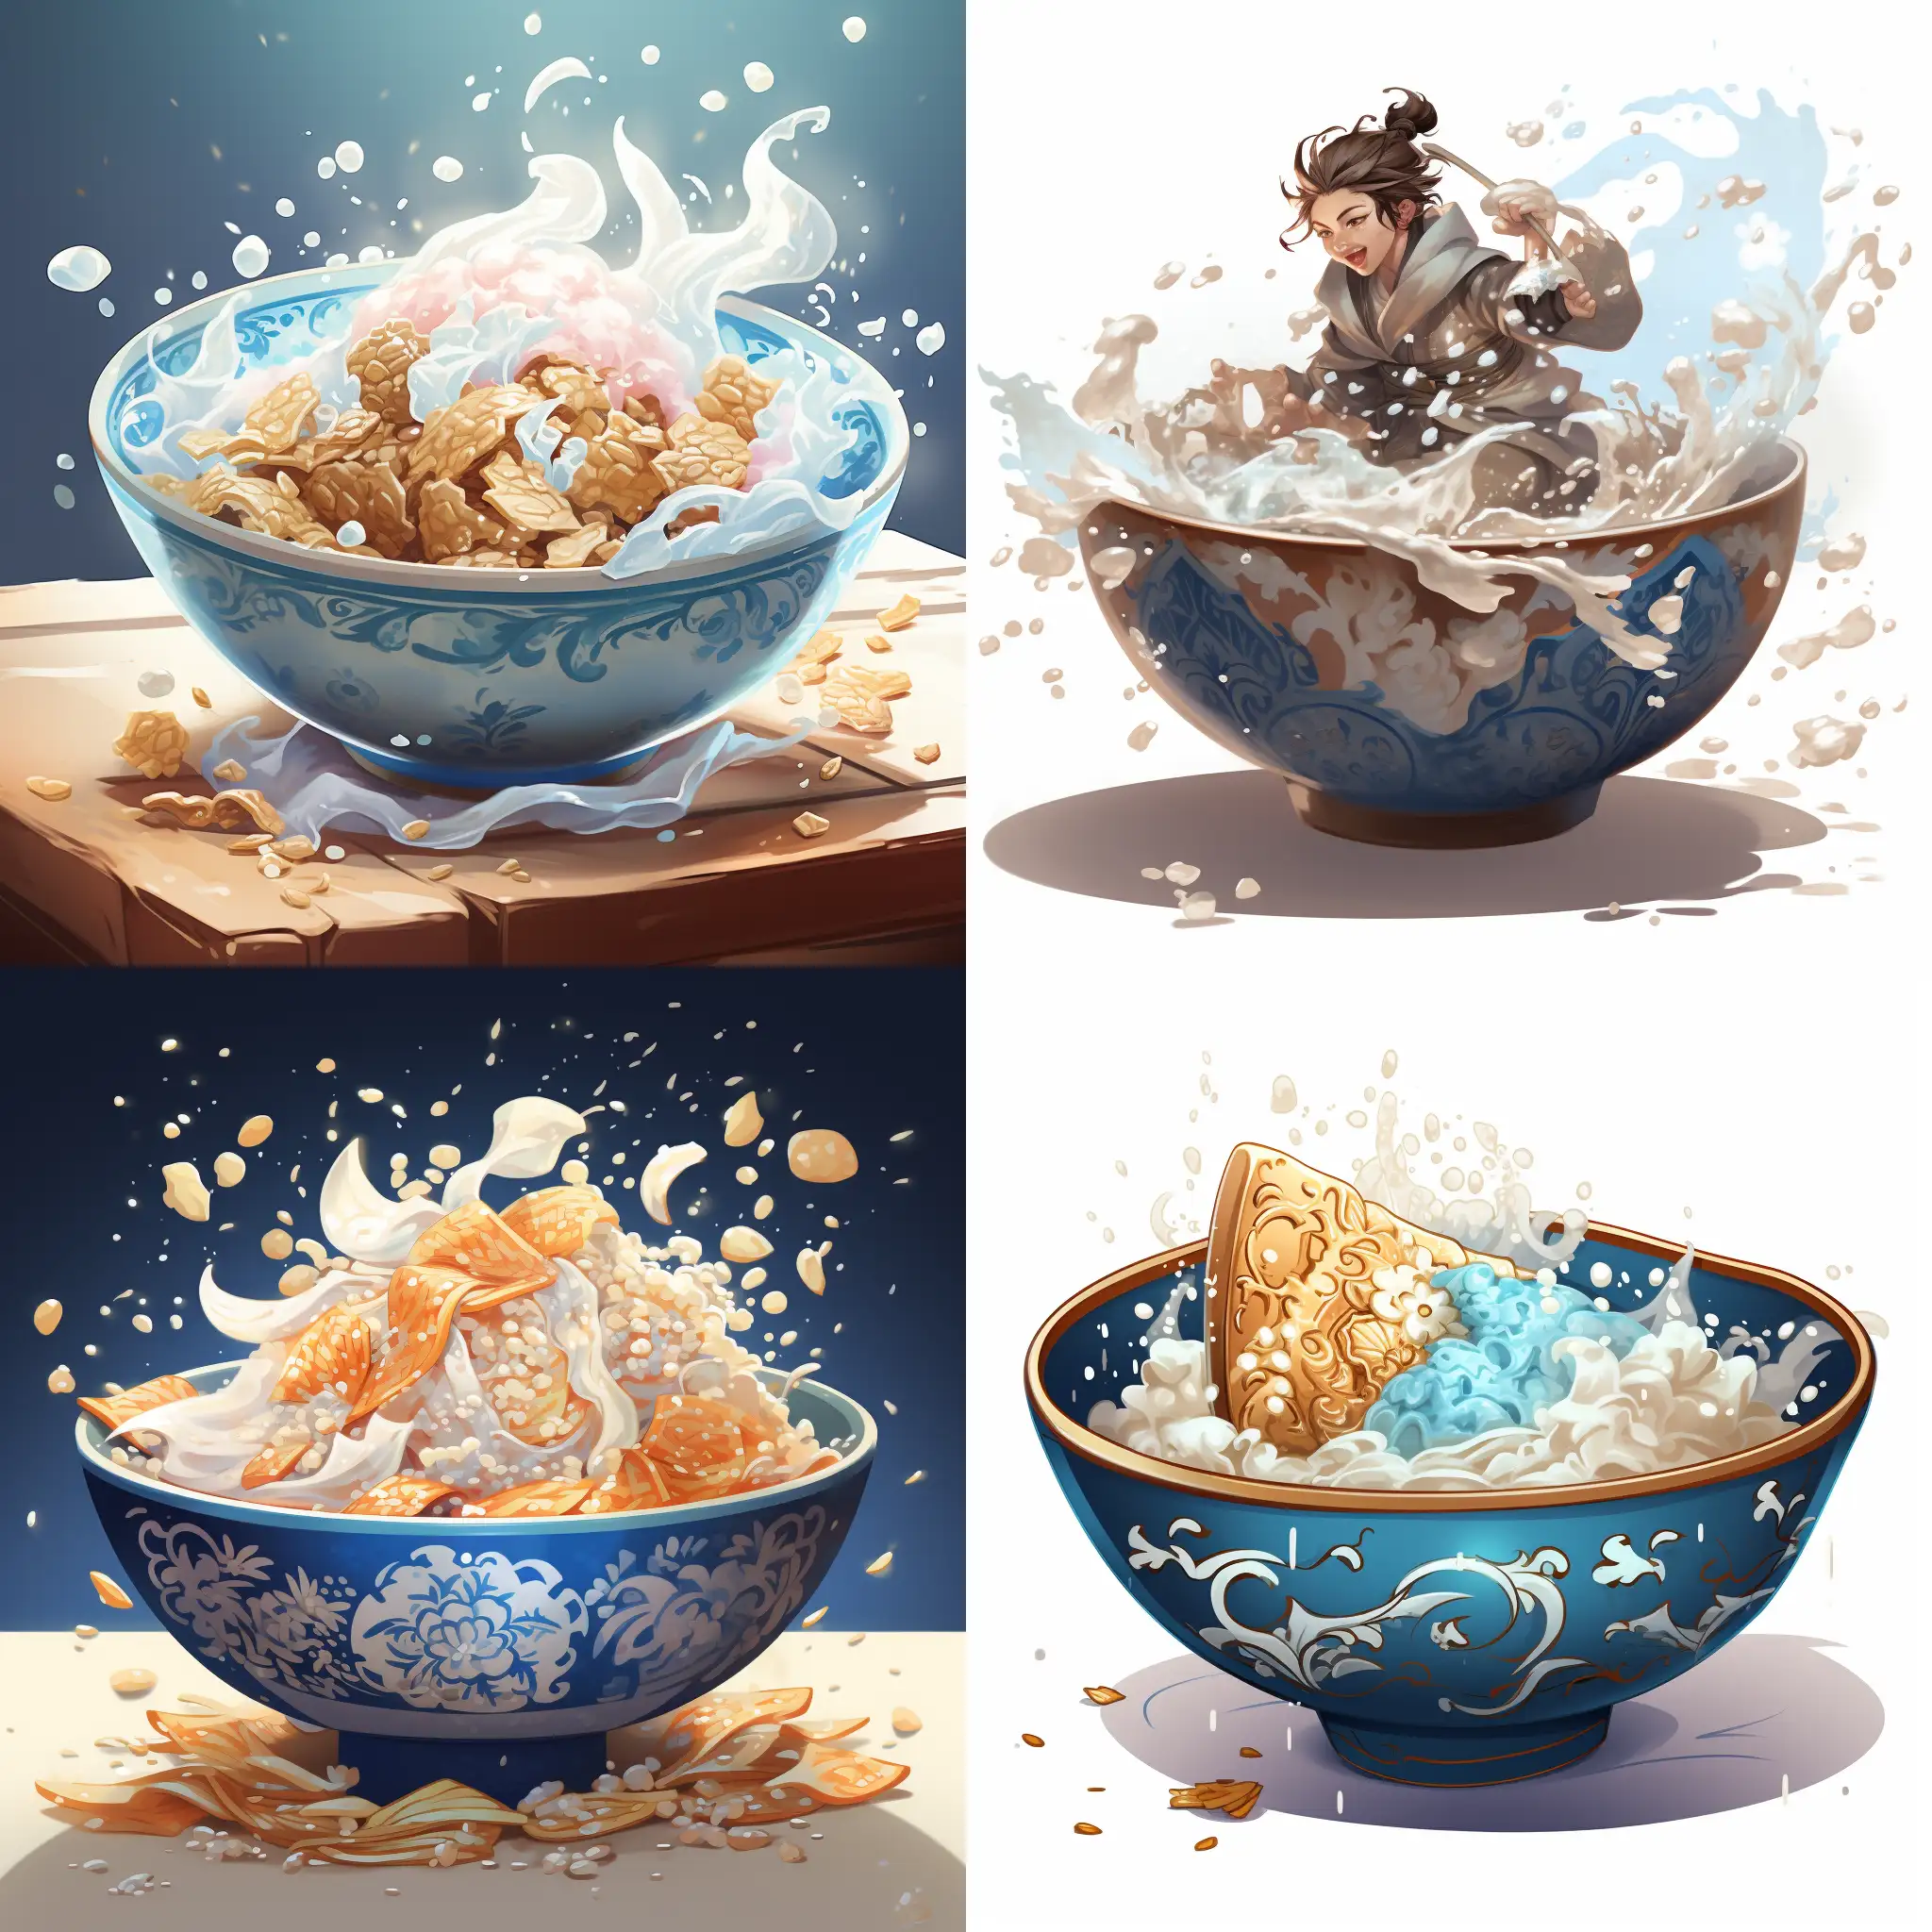 Genshin-Impact-Character-Submerged-in-a-Bowl-with-Flakes